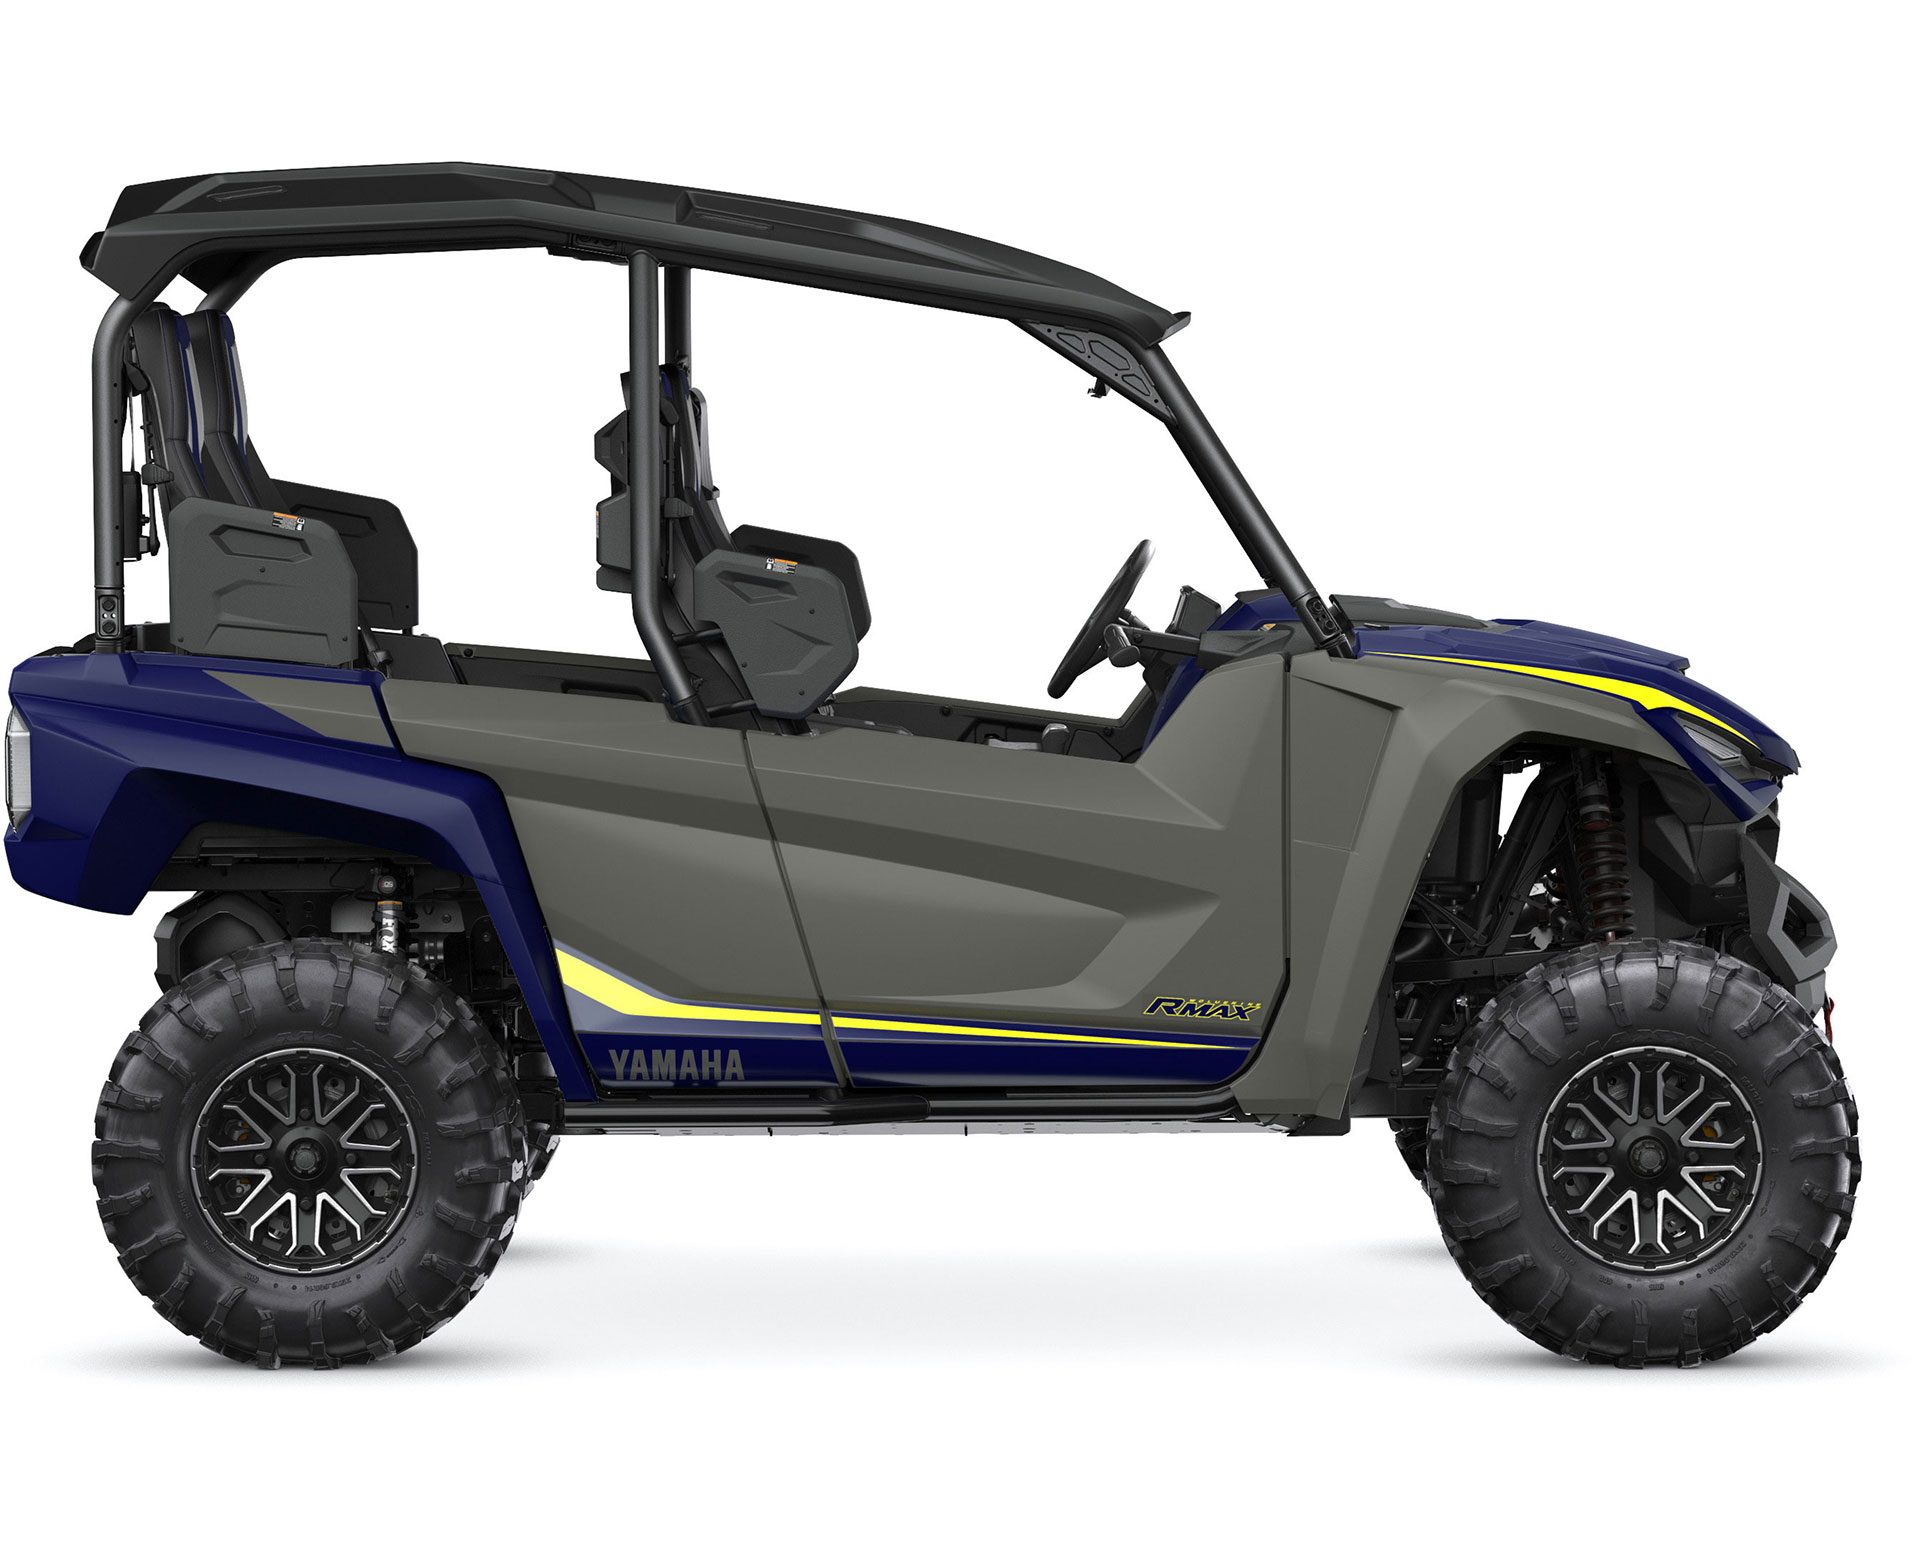 Thumbnail of your customized 2023 WOLVERINE® RMAX4™ 1000 LE